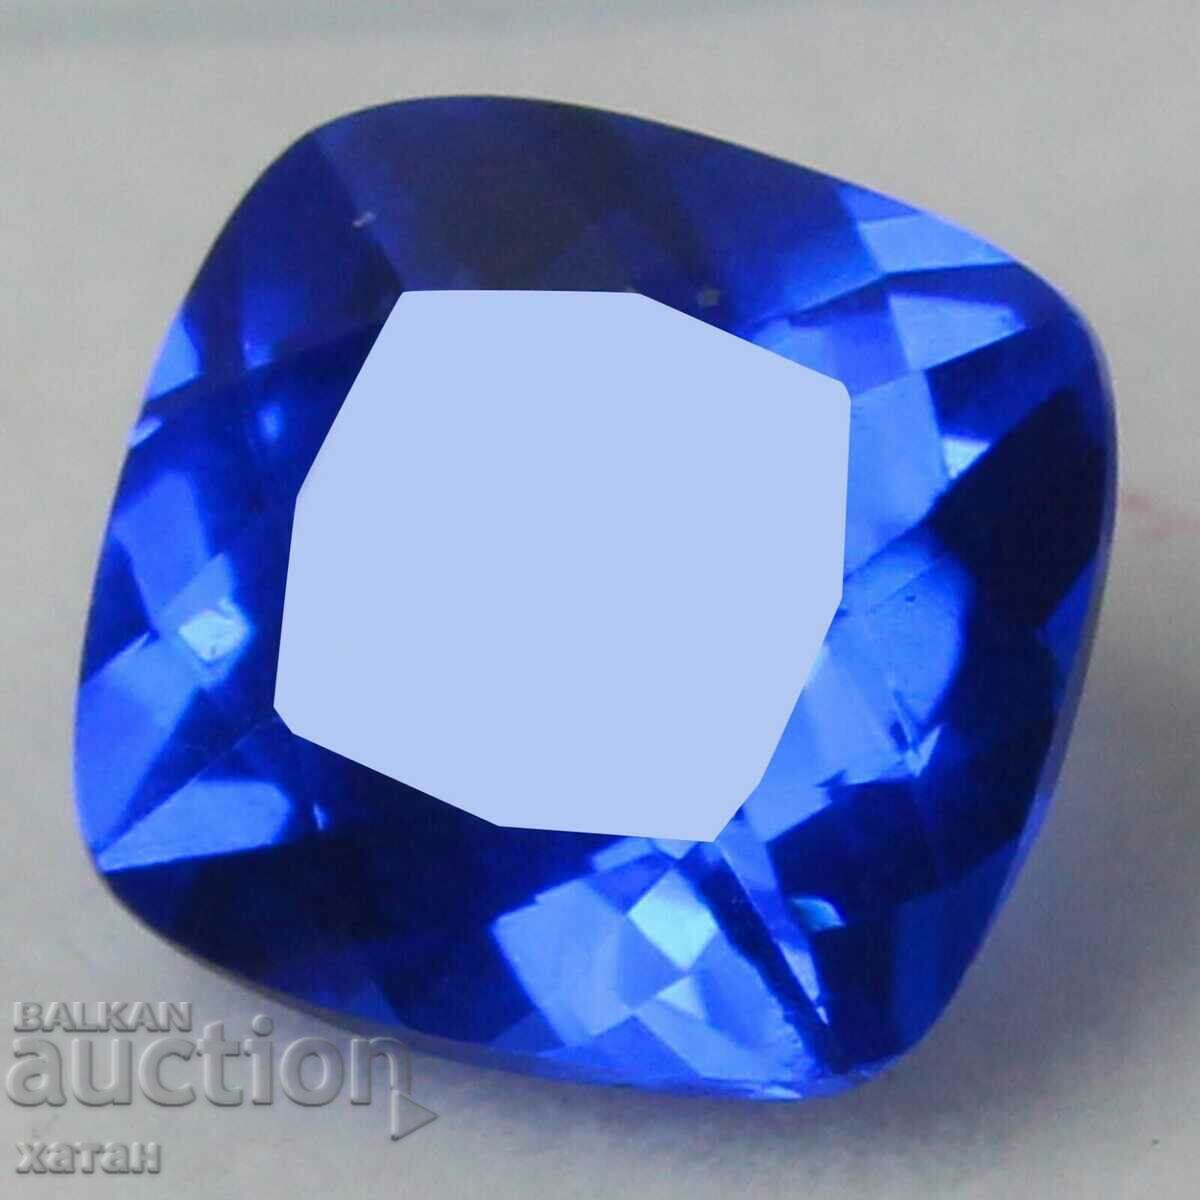 BZC! 2.25 ct natural blue tanzanite cert GDL of 1 st.!